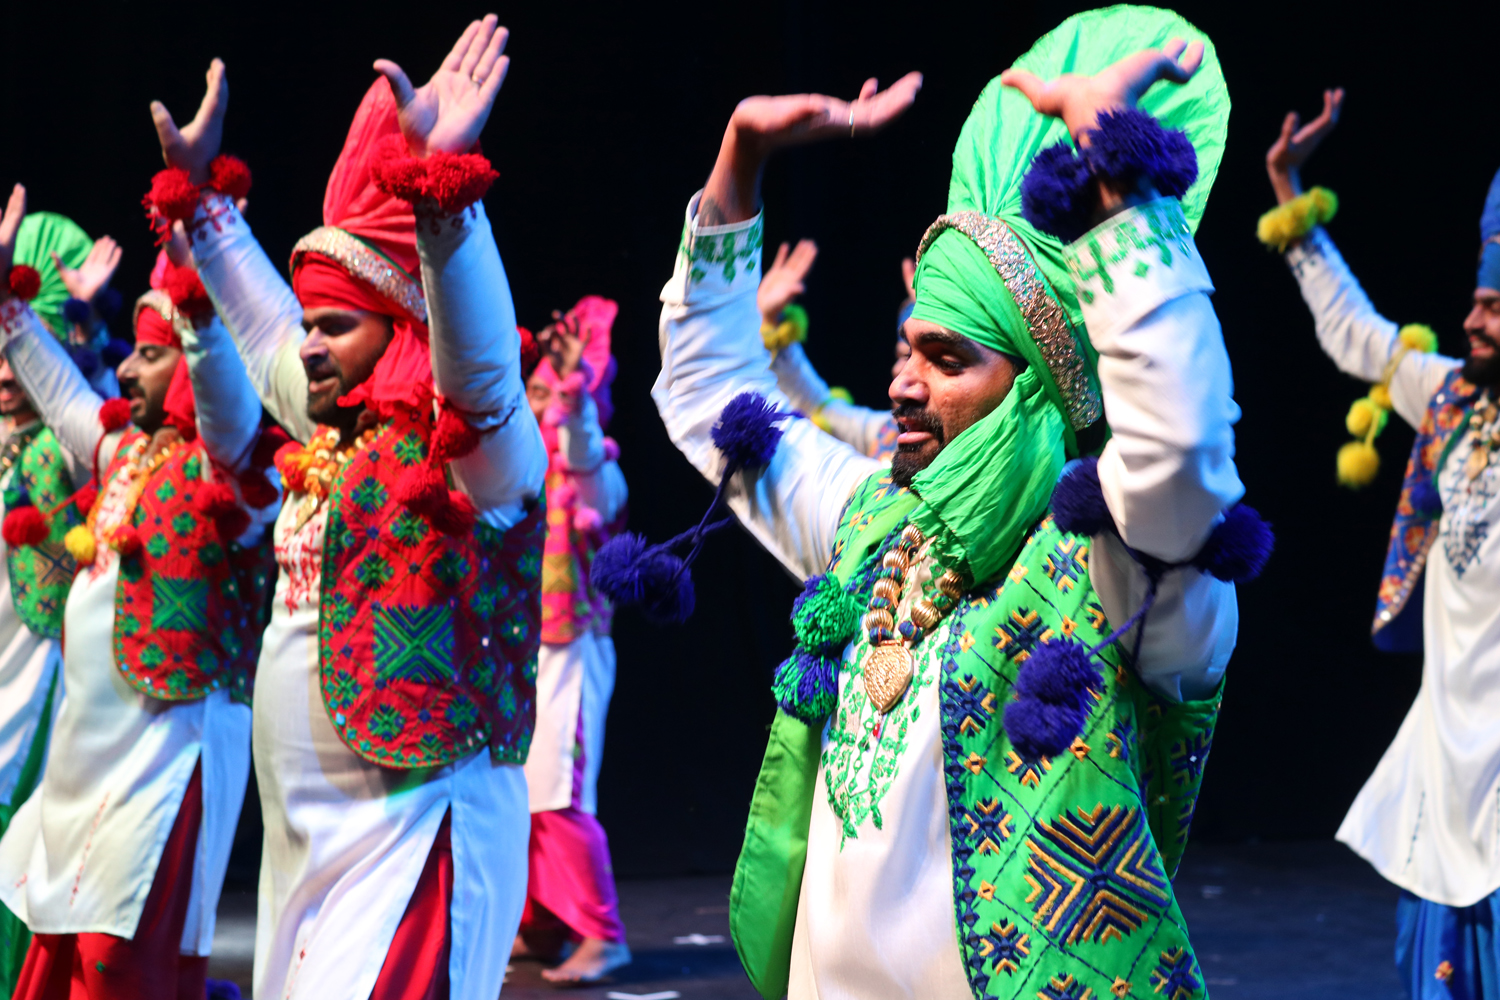 Men in colourful traditional Indian outfits dancing on stage